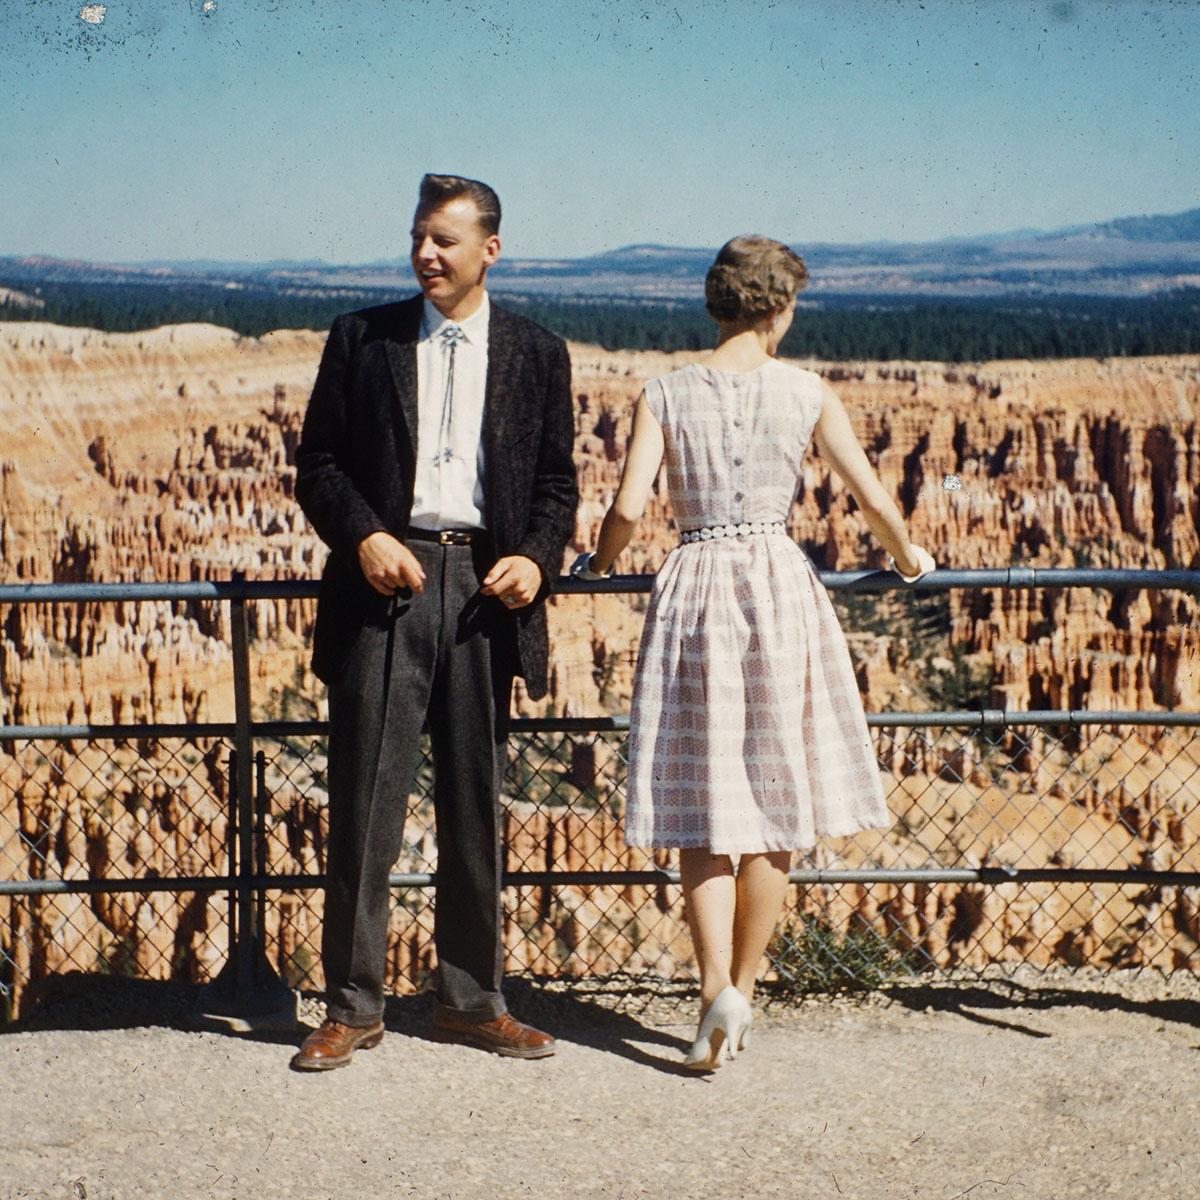 Steve and Elva at Bryce Point in 1959 (Courtesy of the Orton family)